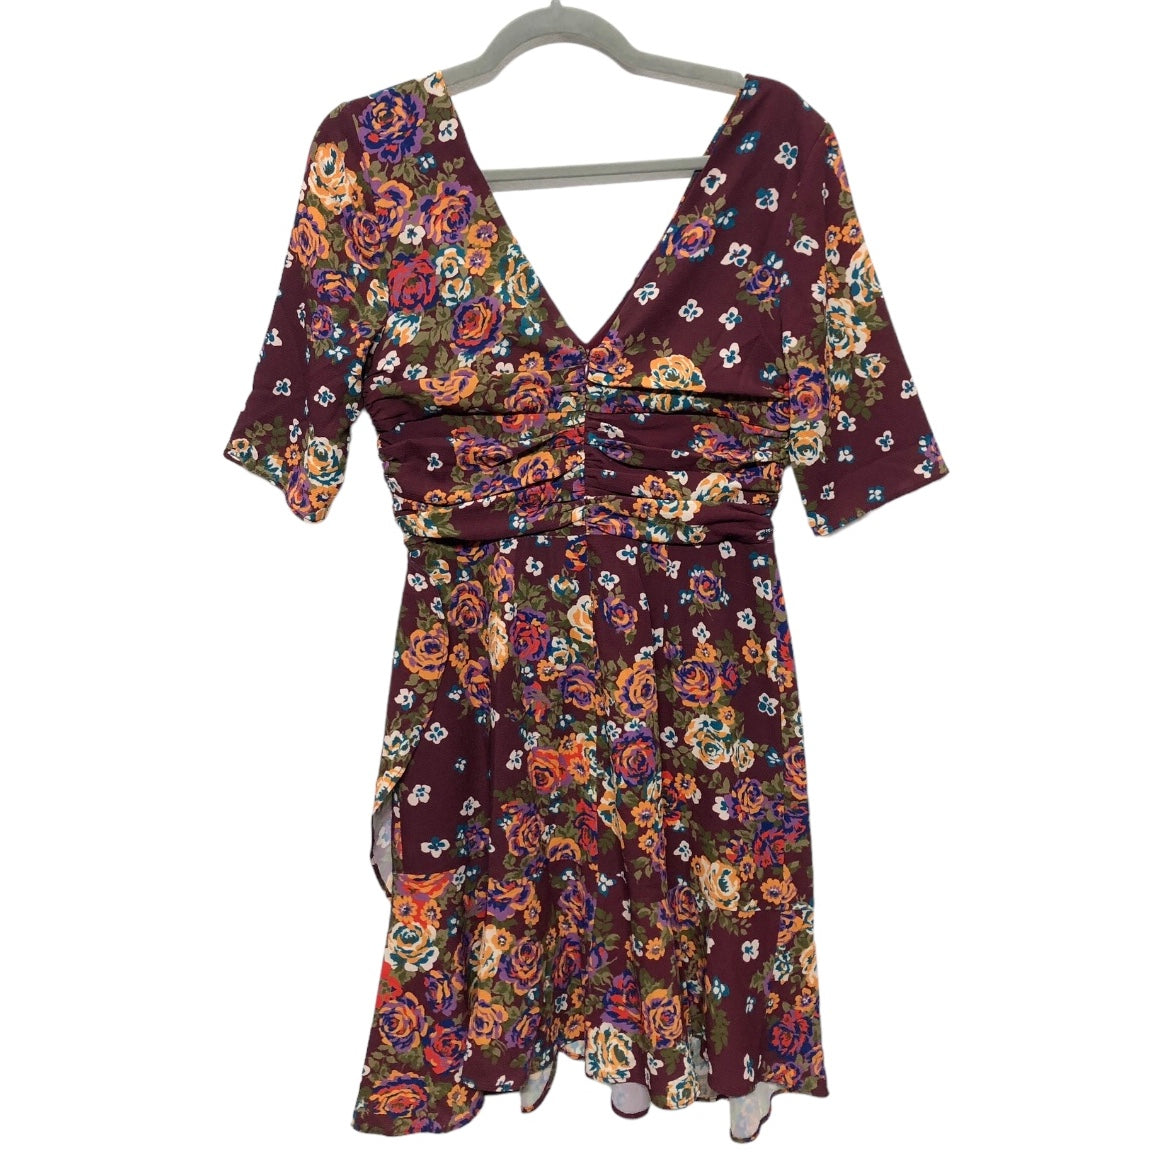 Floral Print Dress Casual Short Wayf, Size S